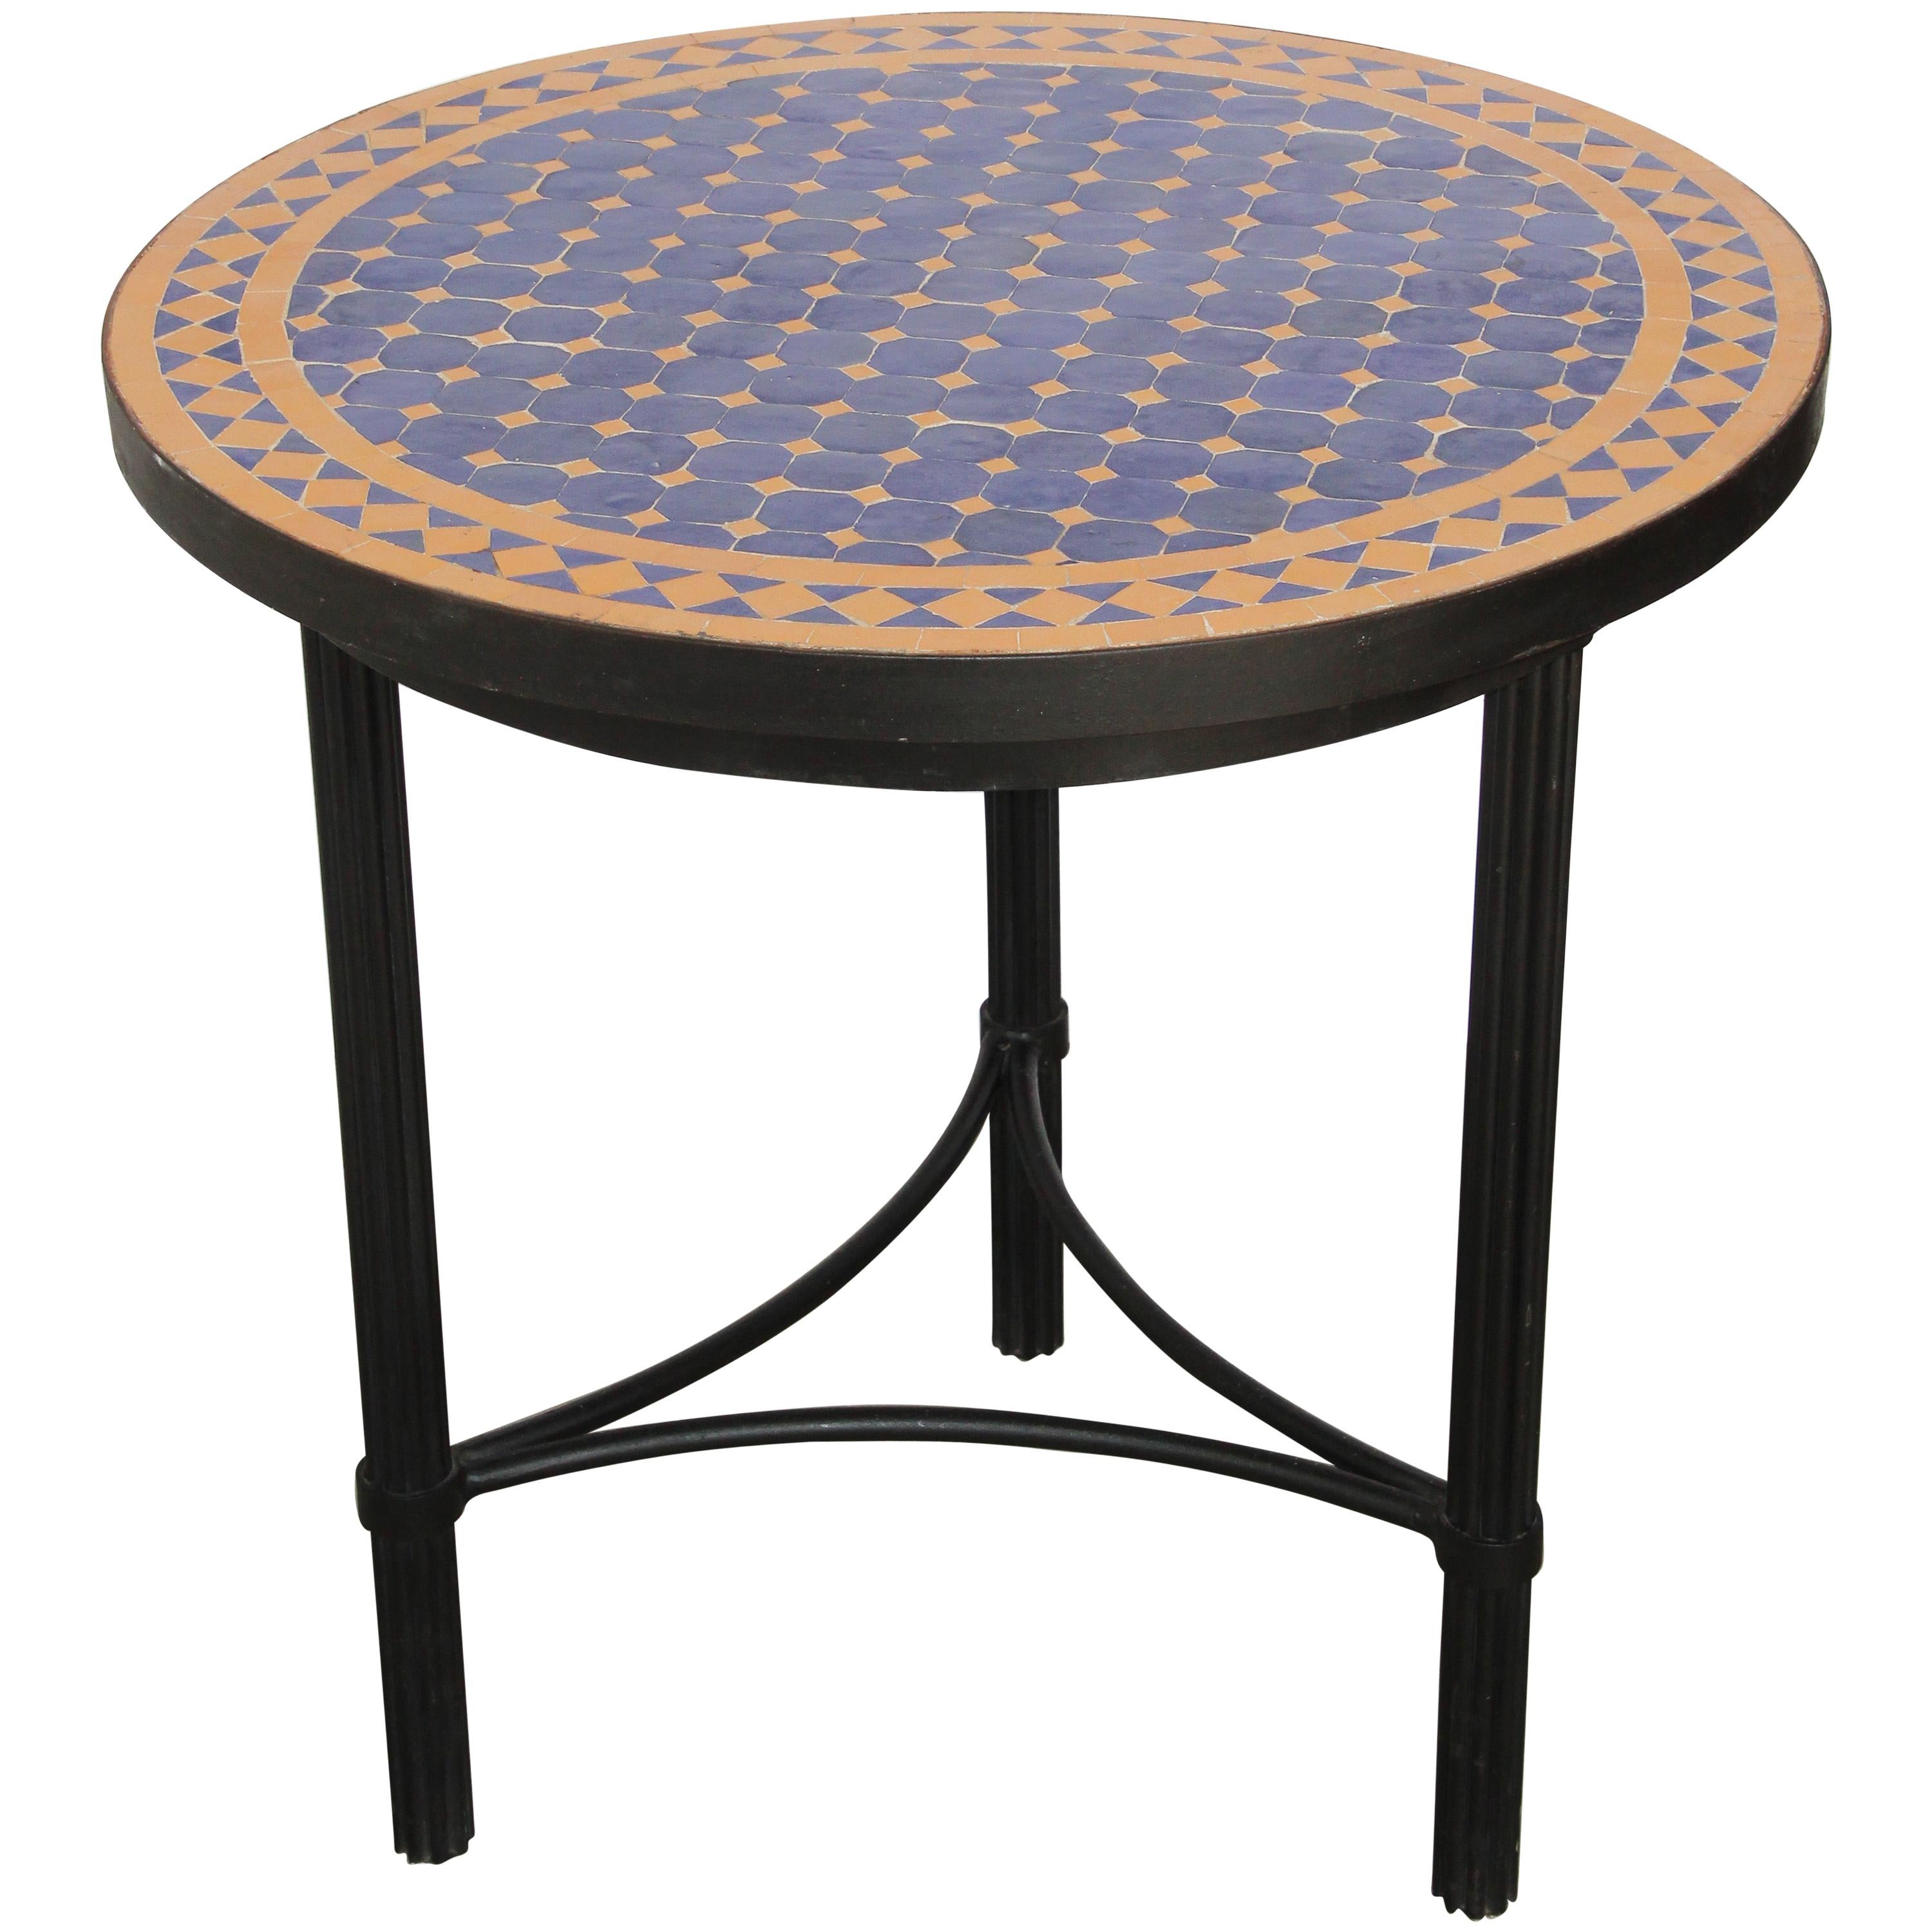 Moroccan Mosaic Tiles Cobalt Blue and Yellow Colors Side Table